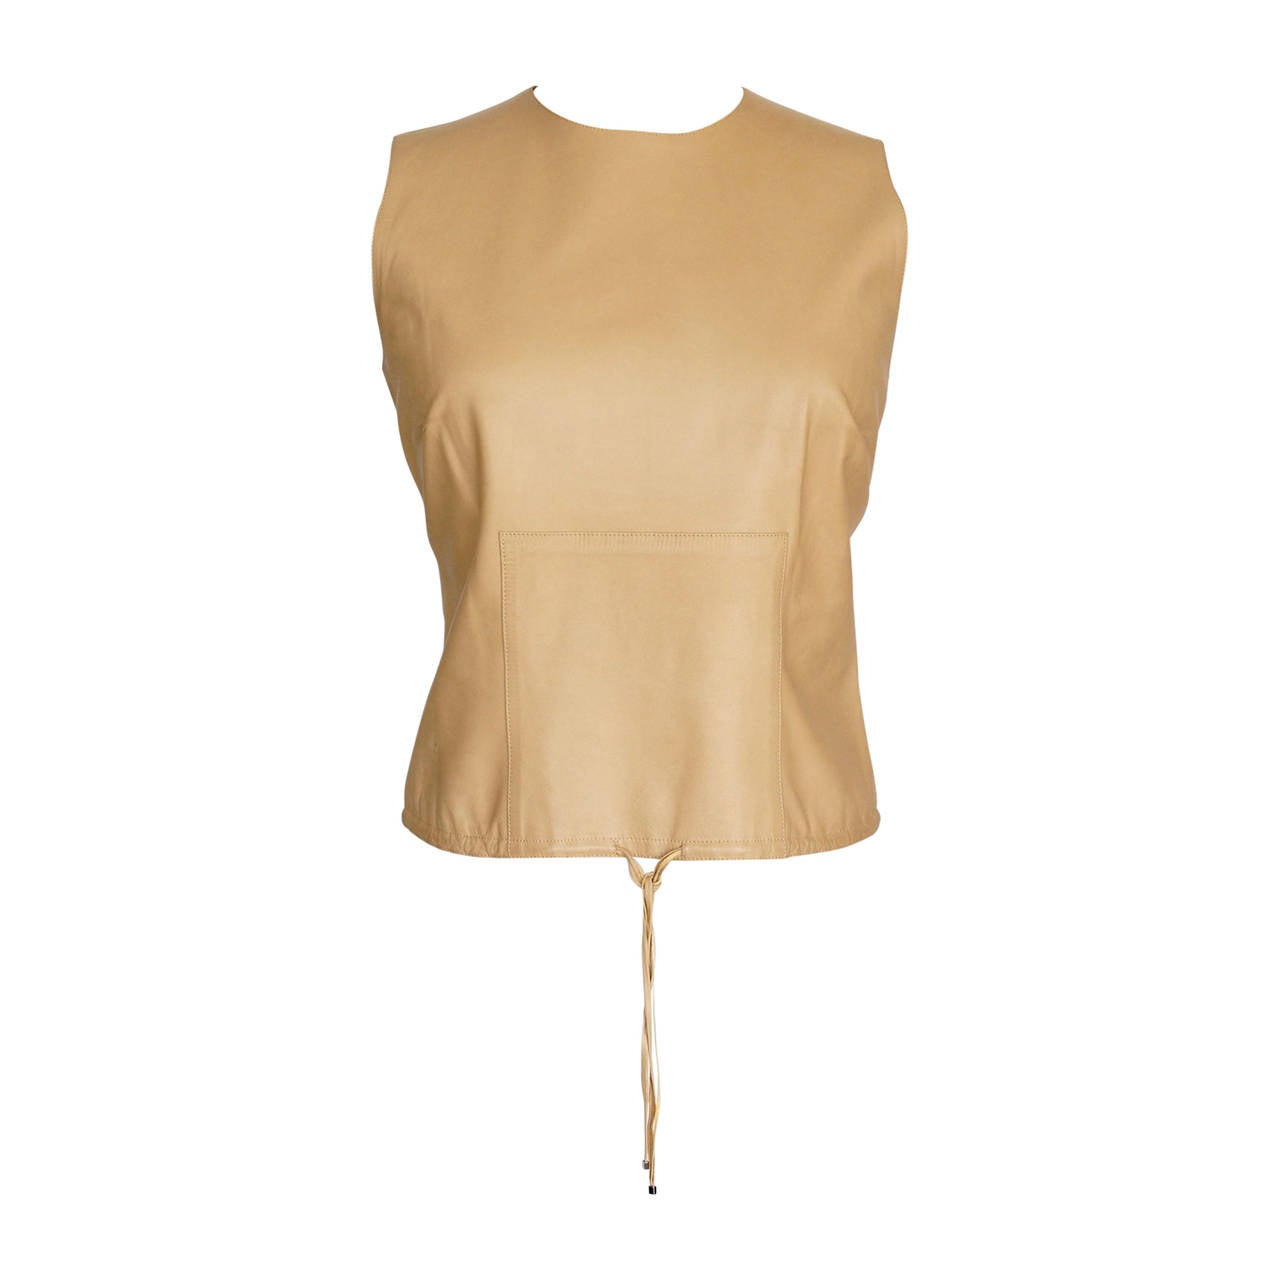 Gucci Leather Top Warm Nude Camel Sleek Classic Tom Ford 40 / 6 For ...